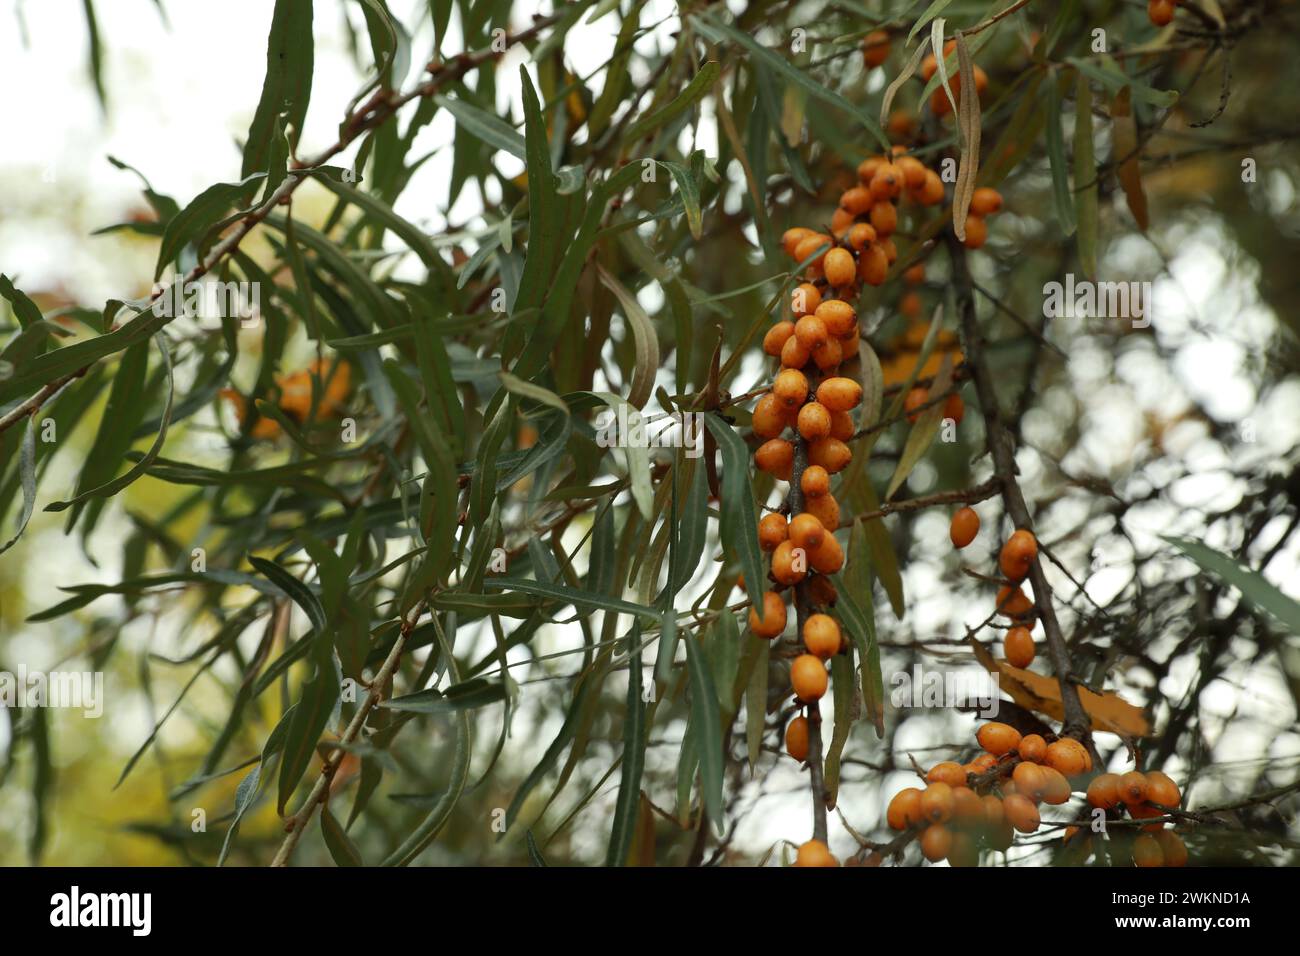 Sea buckthorn shrub with ripe berries growing outdoors Stock Photo